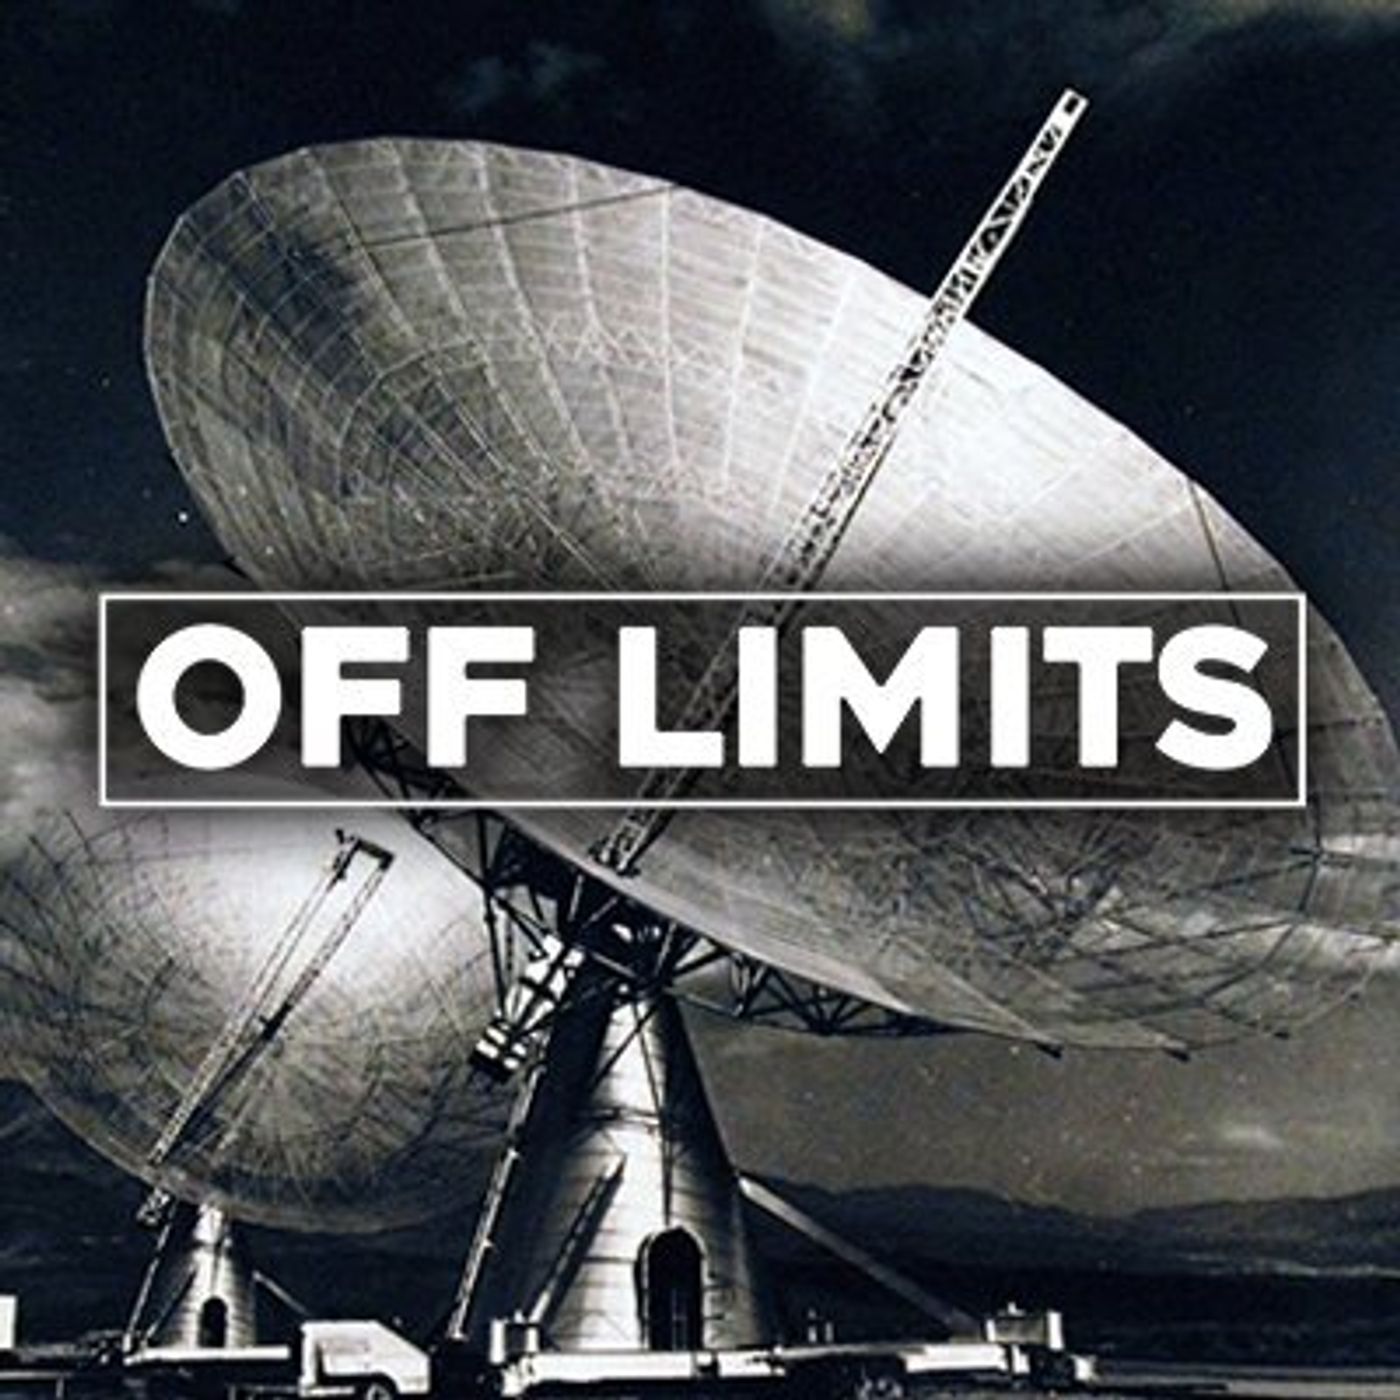 Off Limits - 2019- December 18, Wednesday - New Levels Of White Supremacy We Never Thought Possible!